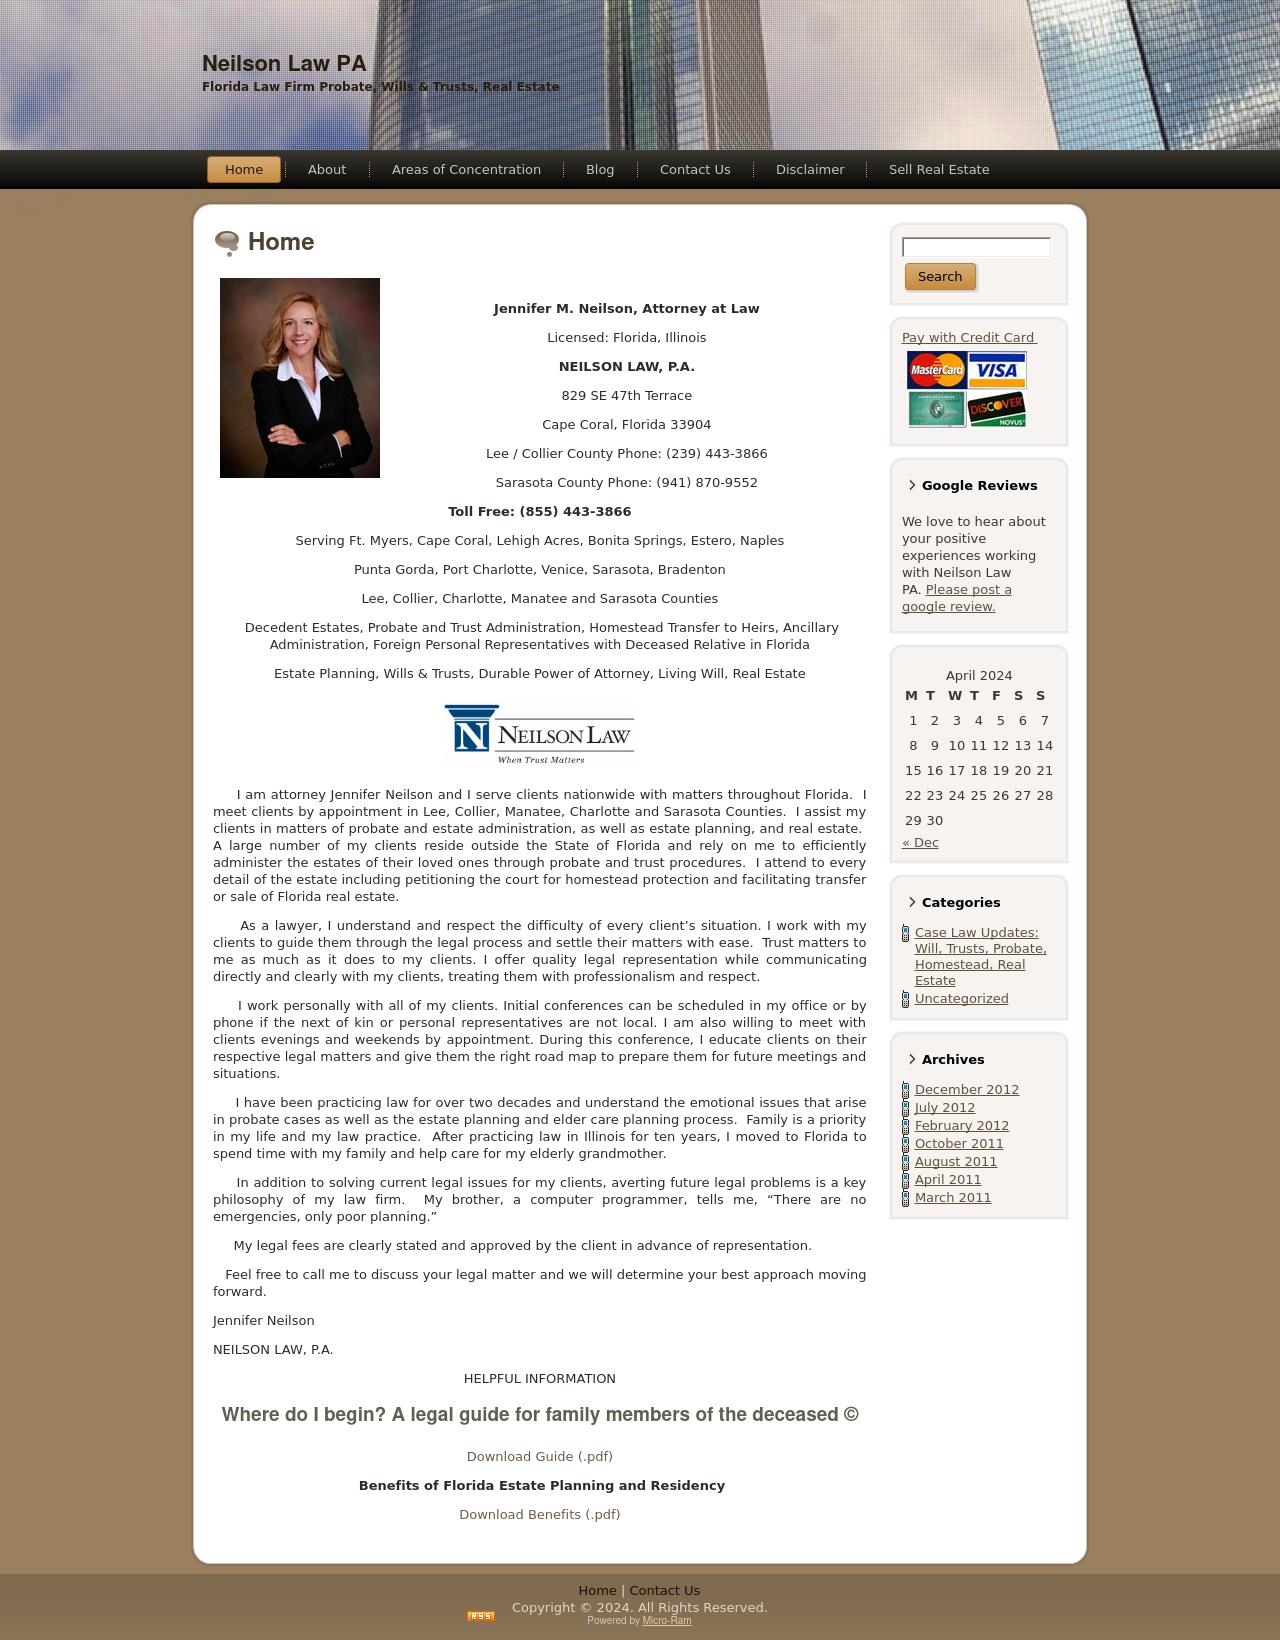 Neilson Law, P.A. - Probate, Trusts and Estates Law Firm - Naples FL Lawyers